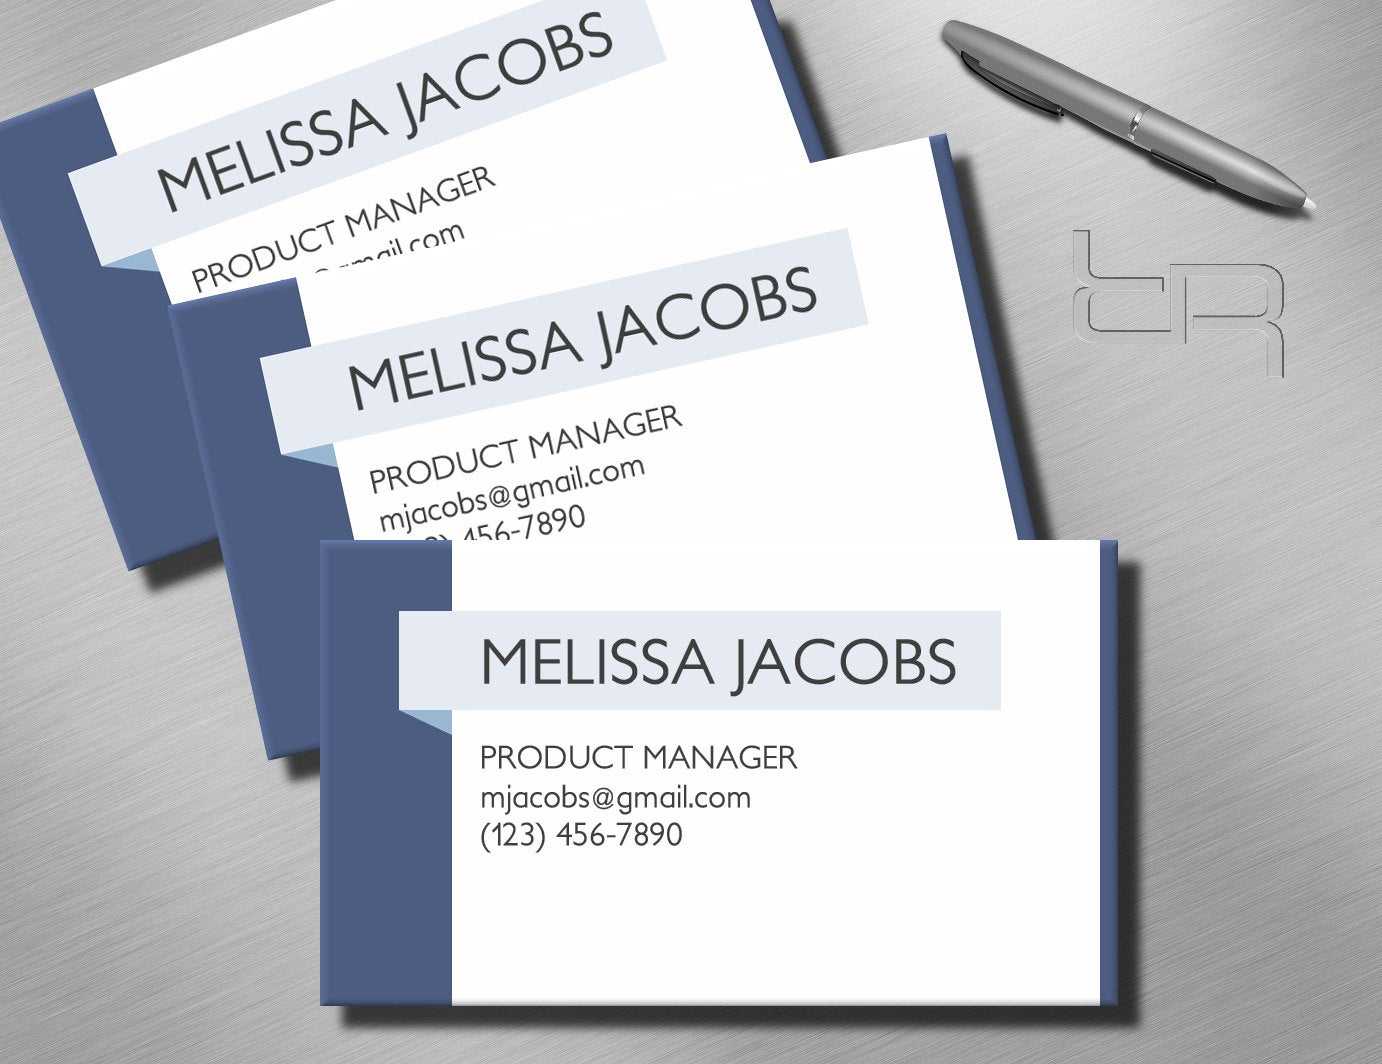 Southworth Business Card Template ] - White Business Card Throughout Southworth Business Card Template